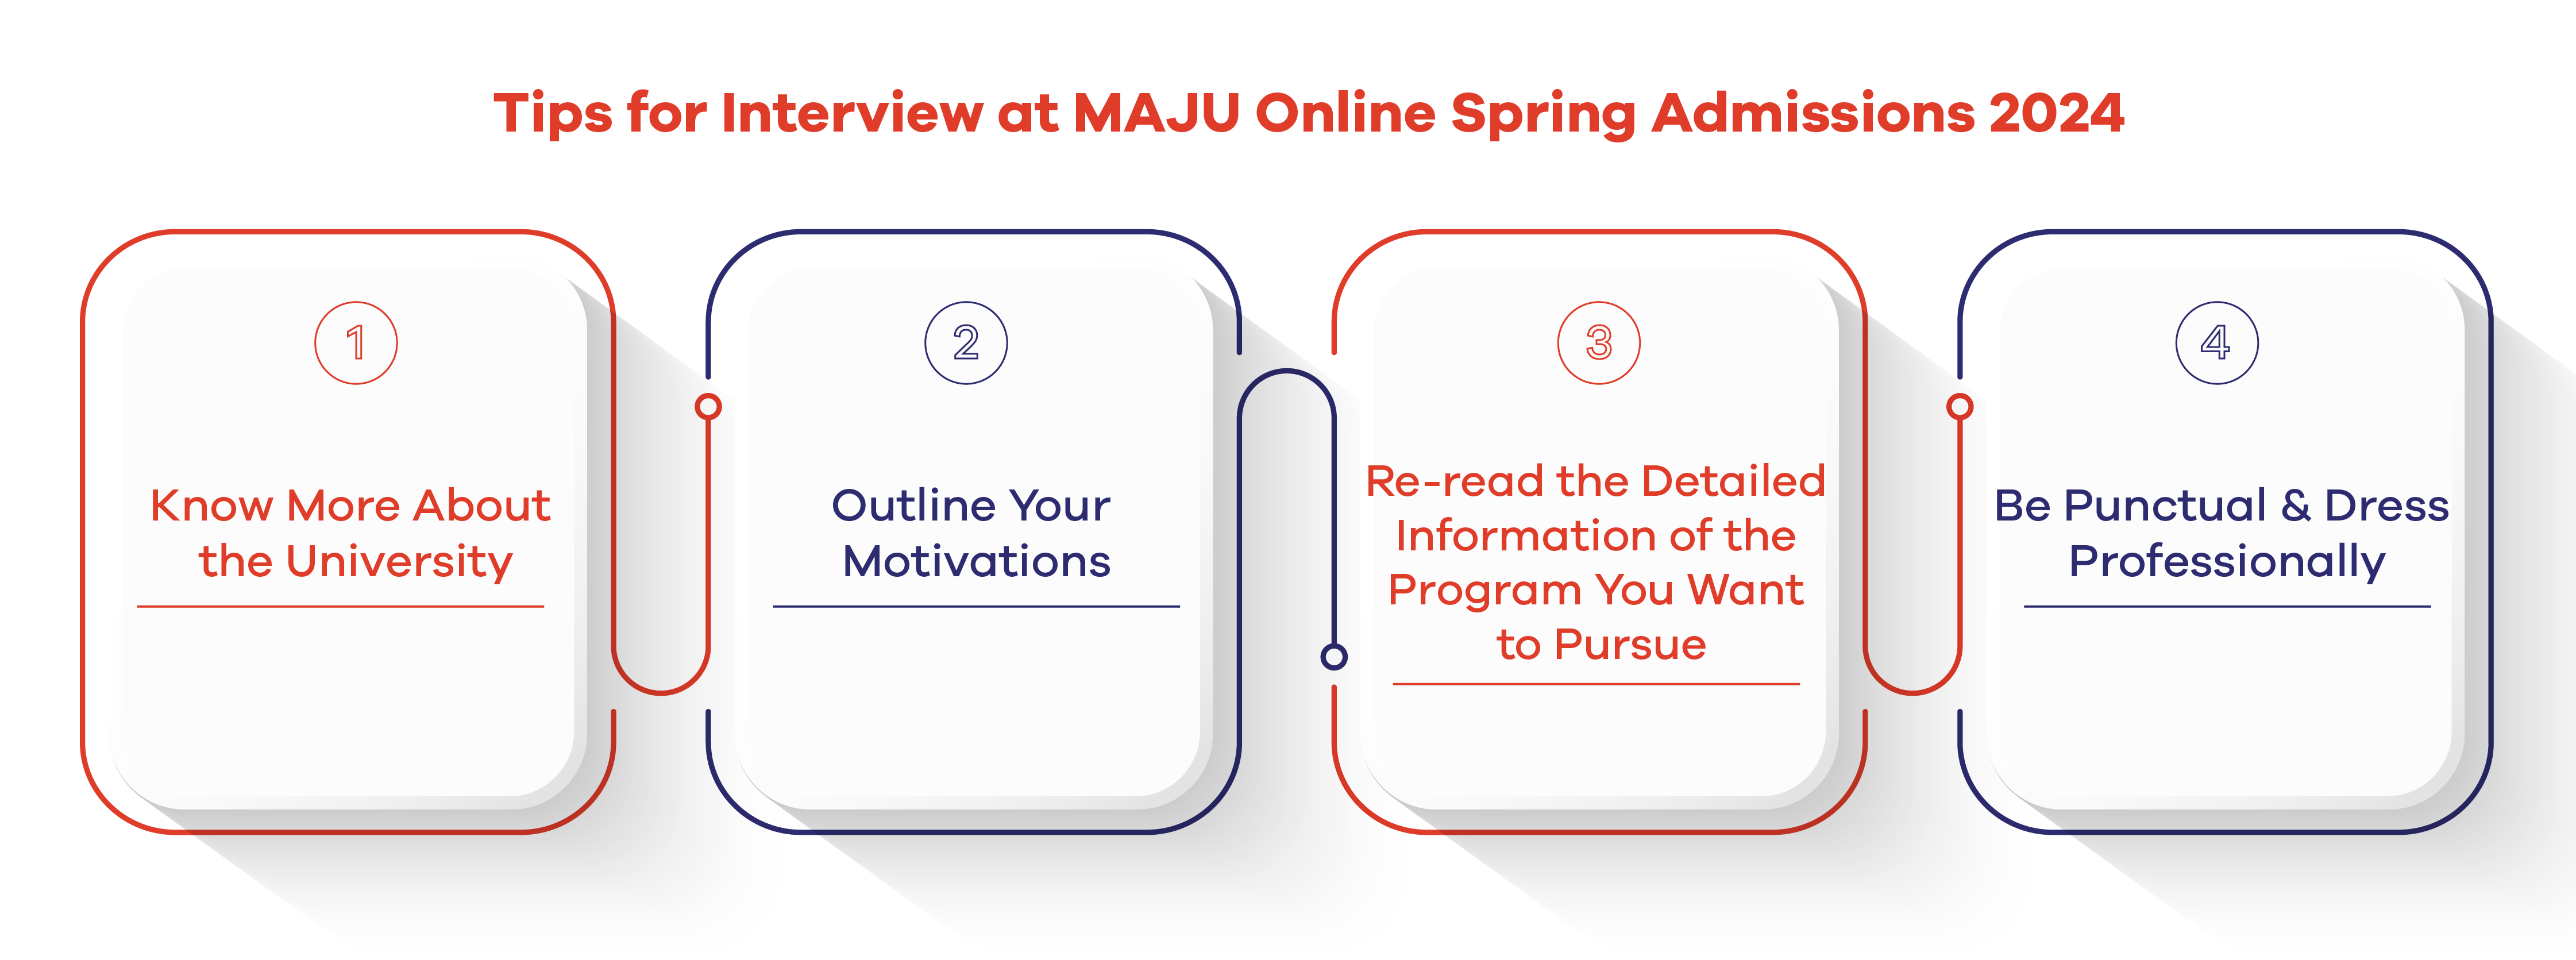 Tips for Interview at MAJU Online Spring Admissions 2024